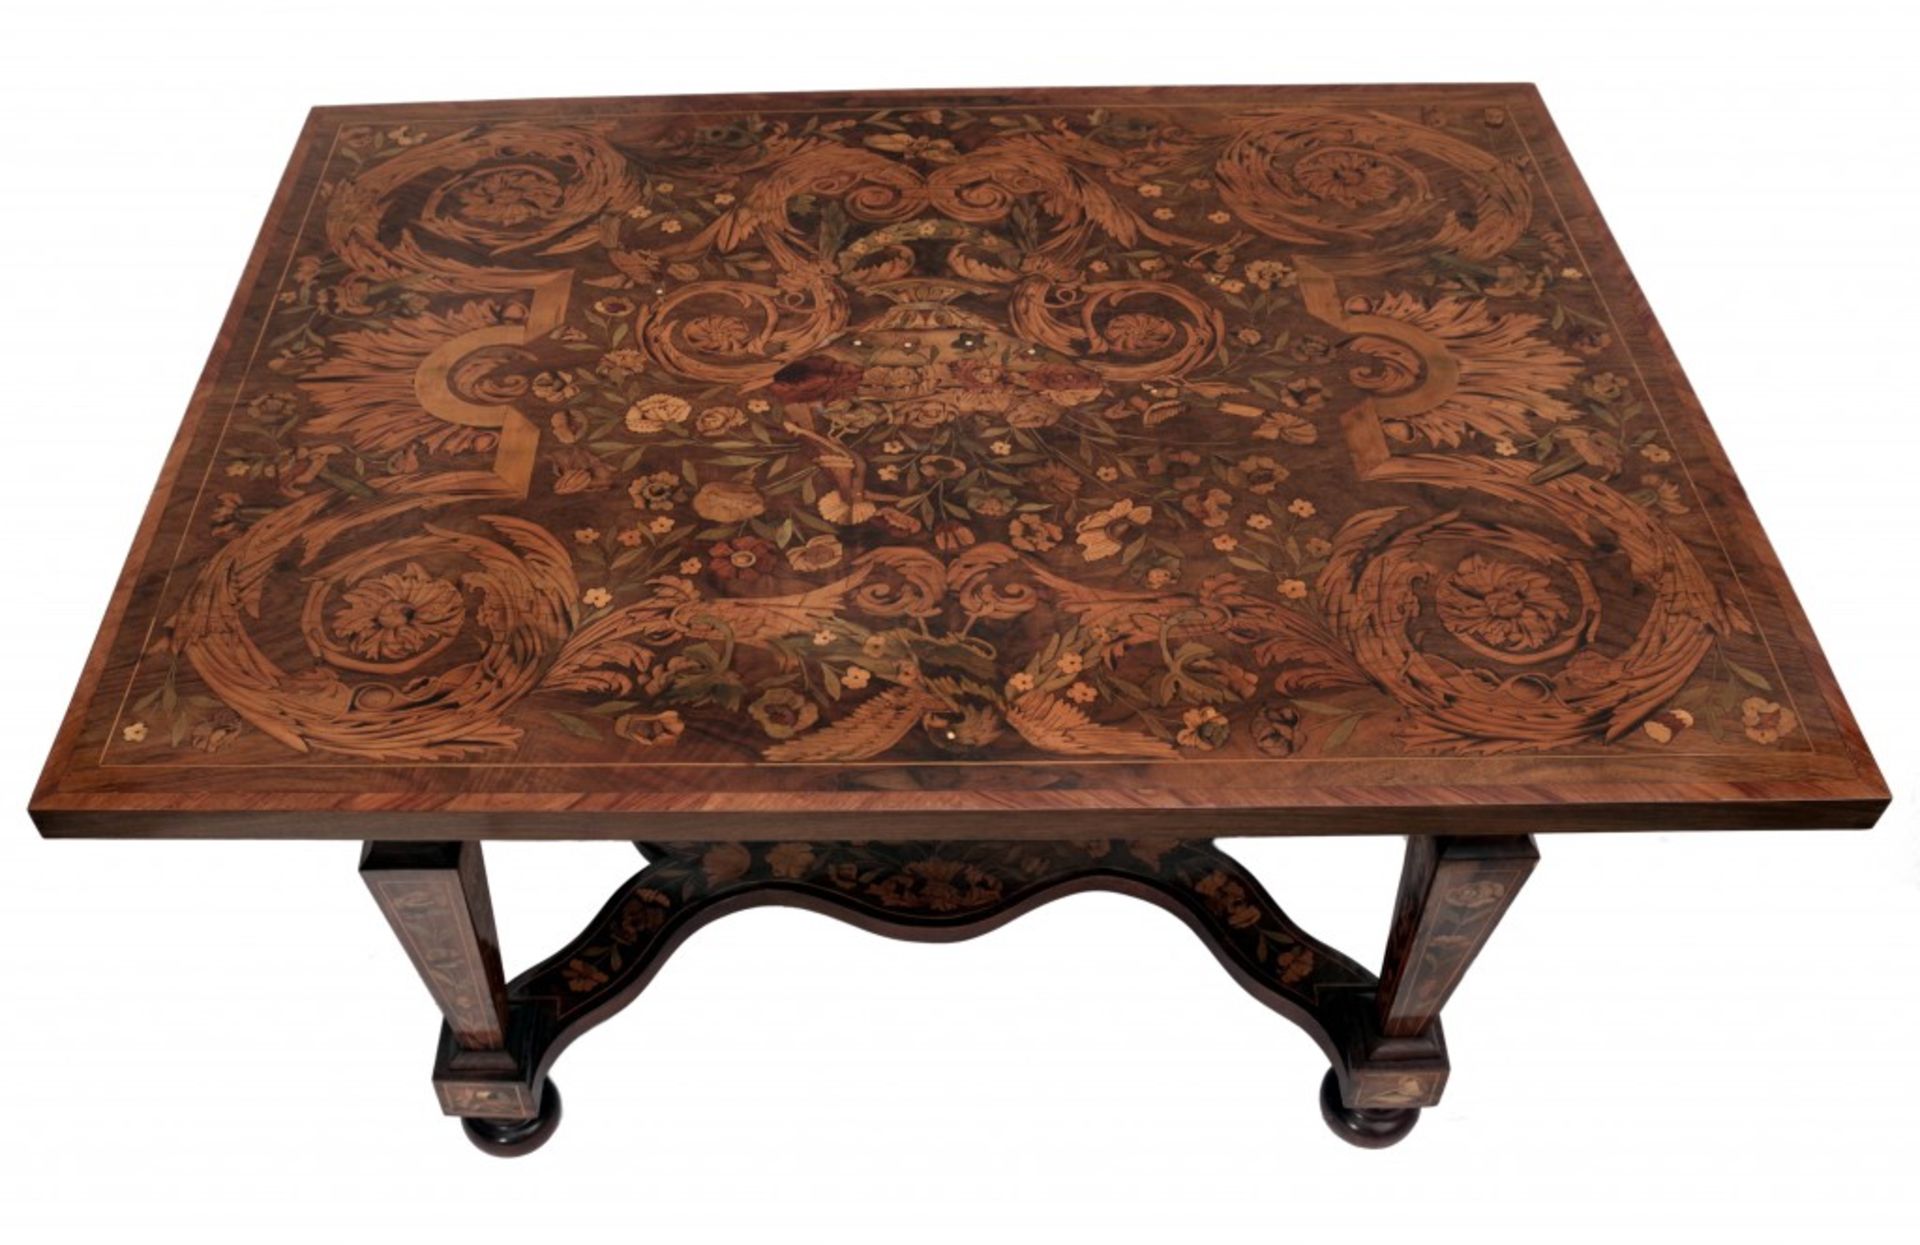 Rare  Dutch Marquetry Table - Image 2 of 4